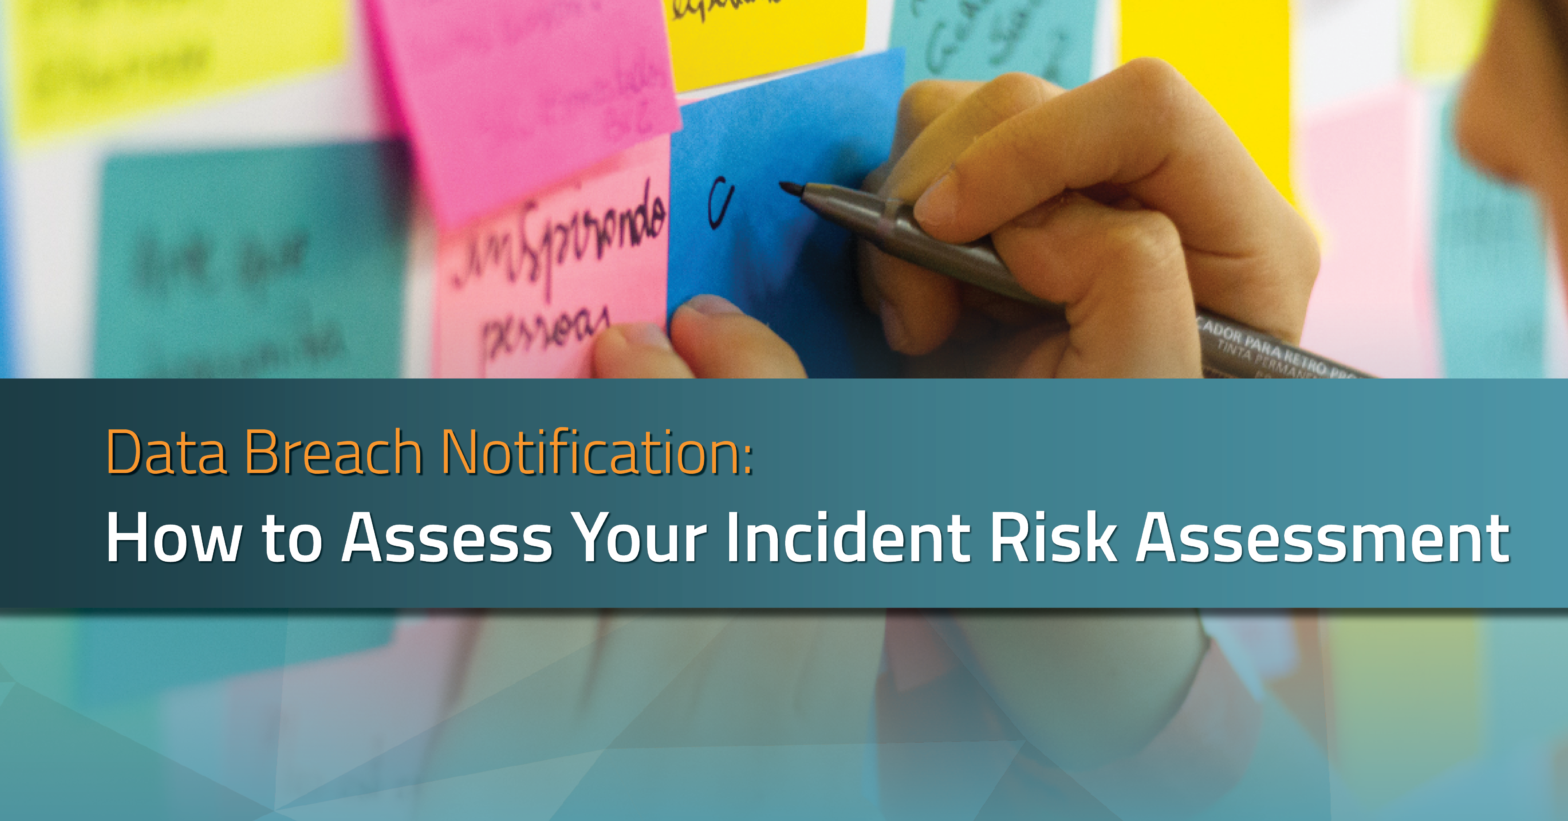 Data Breach Notification- How to Assess Your Incident Risk Assessment